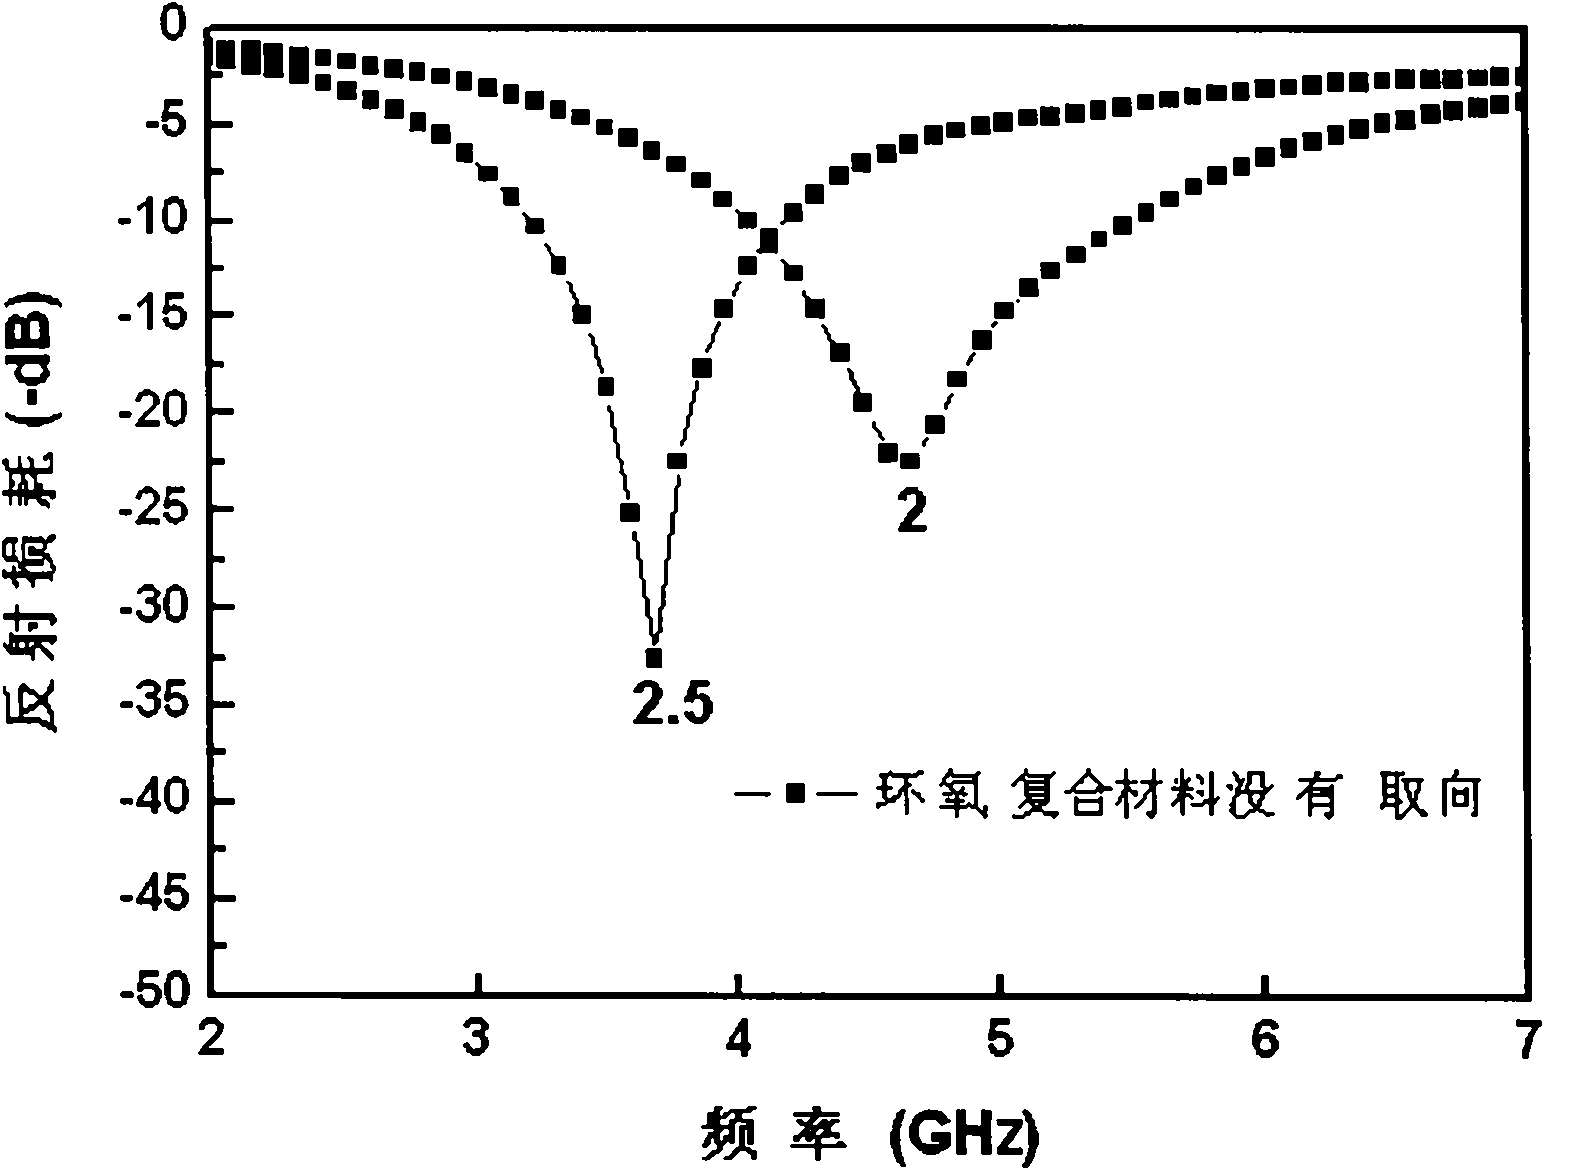 Electromagnetic wave absorption material